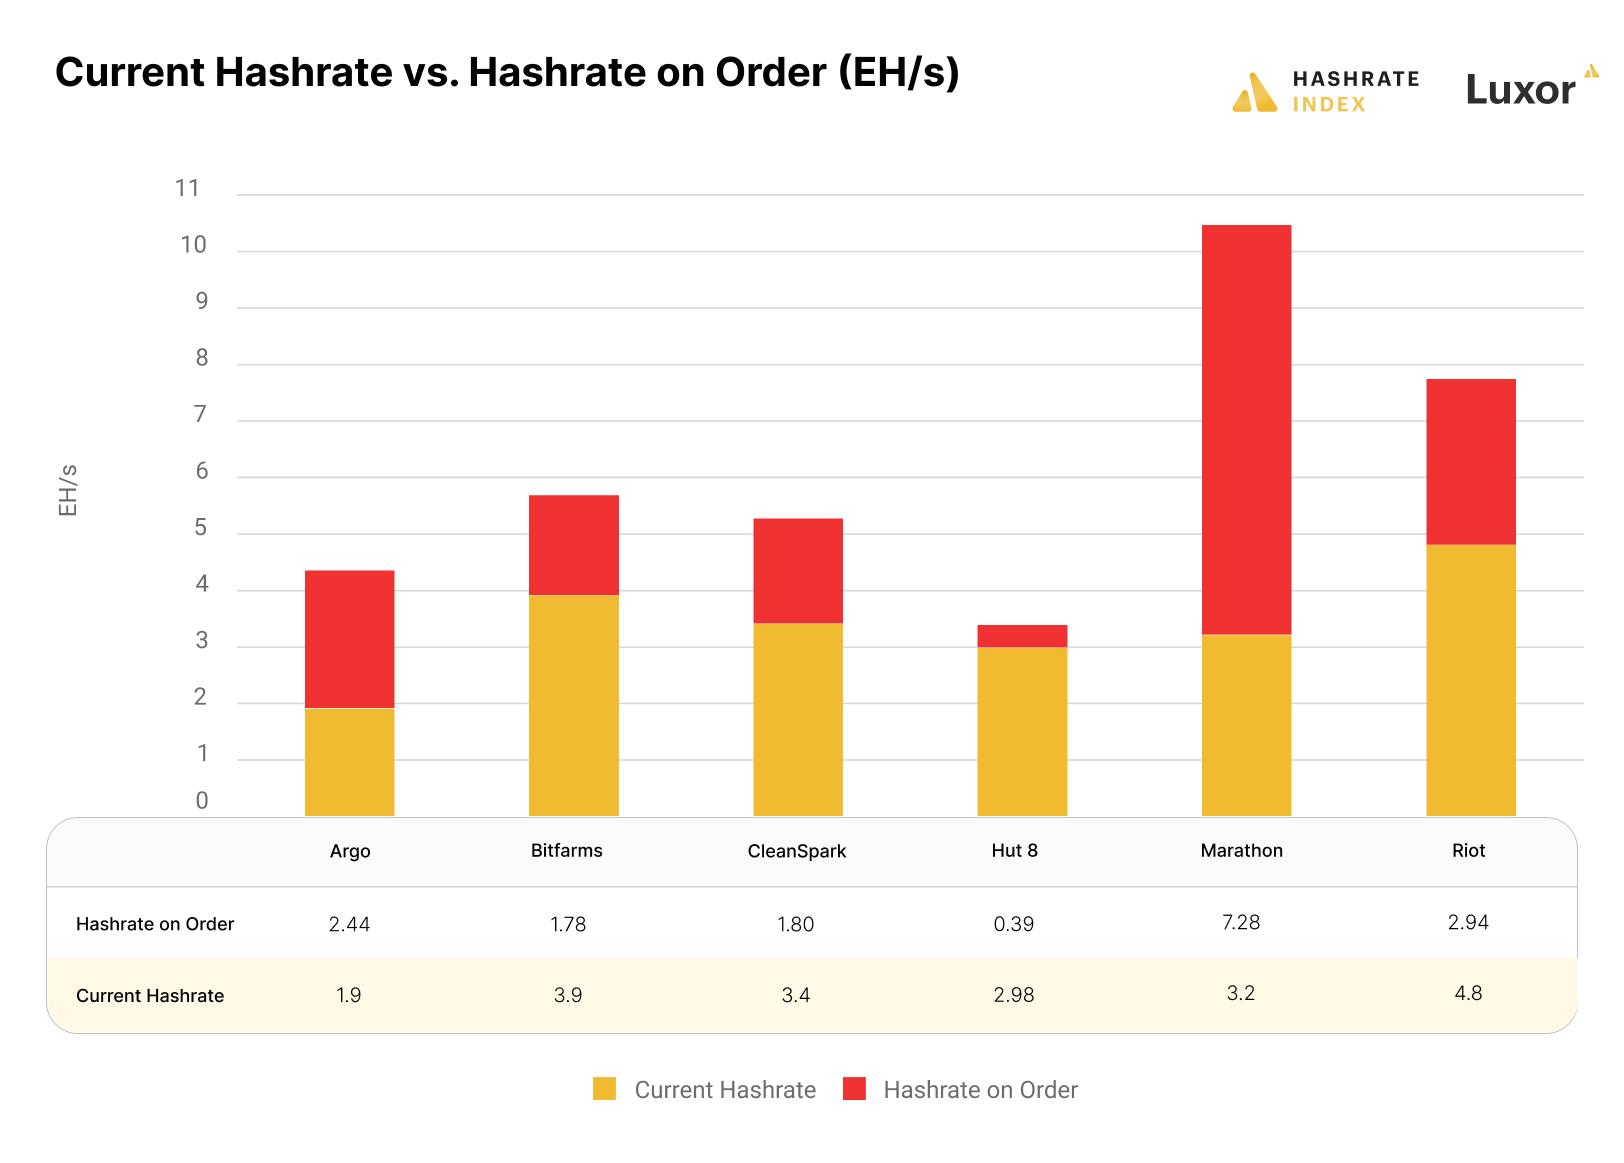 Current and on-order hashrate for public bitcoin miners in our analysis | Source: public miner disclosures and press releases